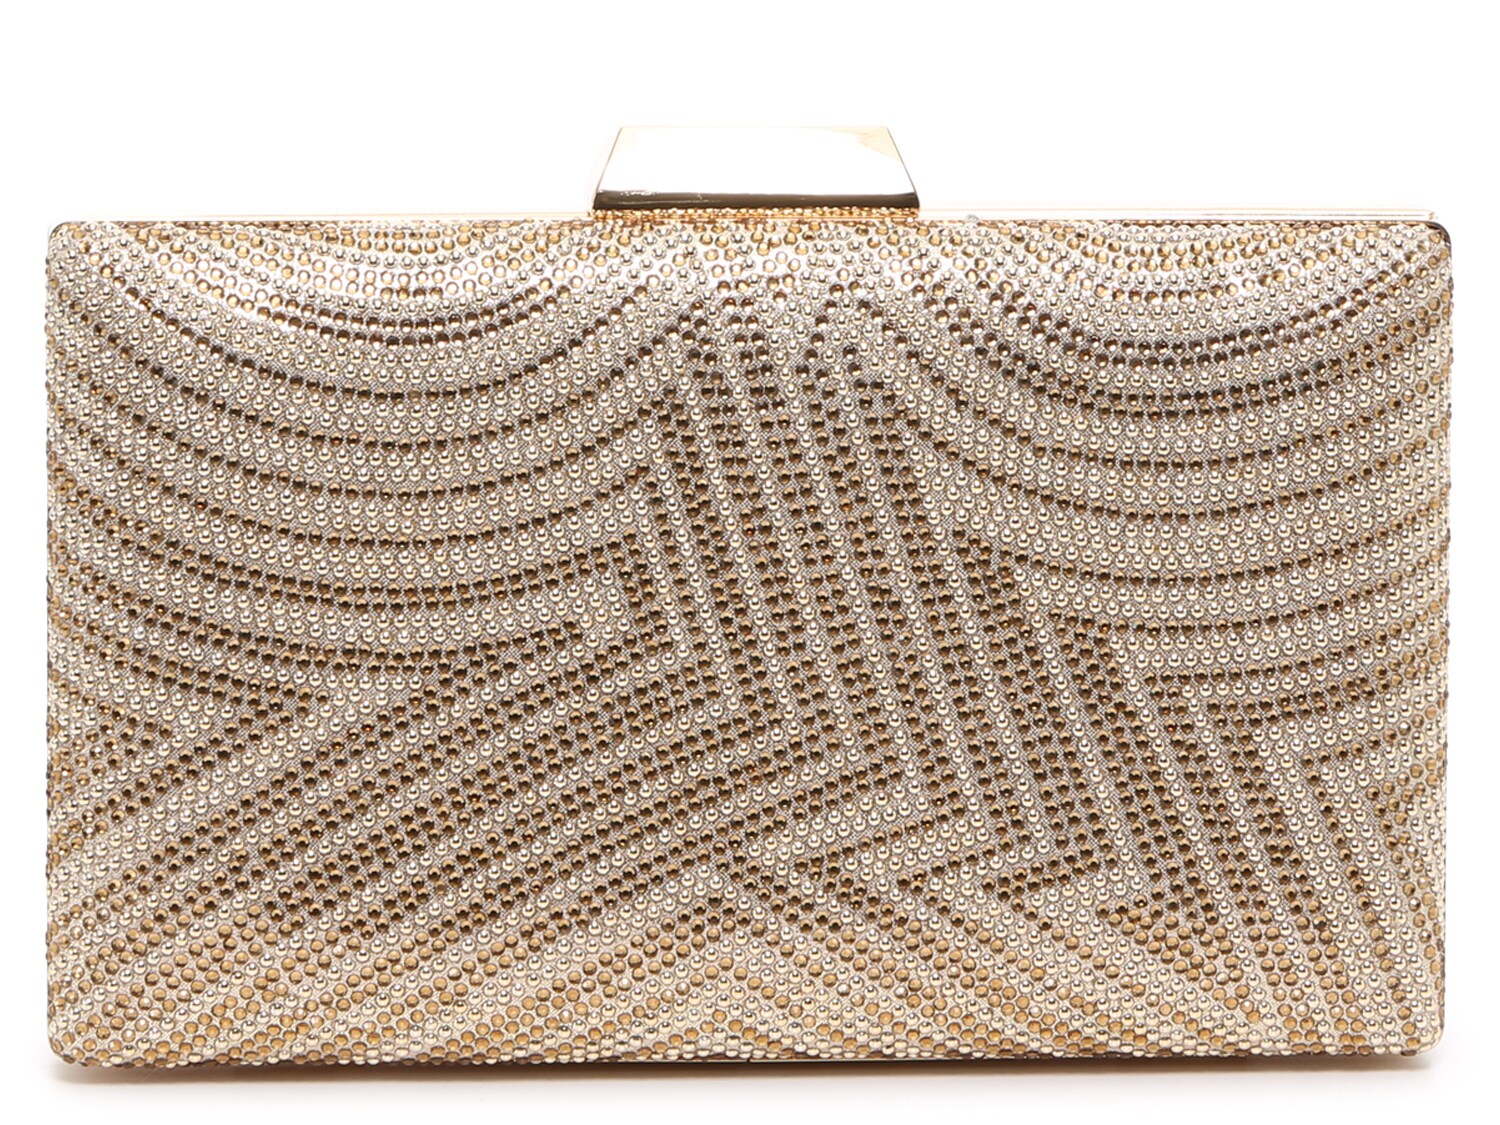 Kelly & Katie Curves Crystal Clutch - Free Shipping